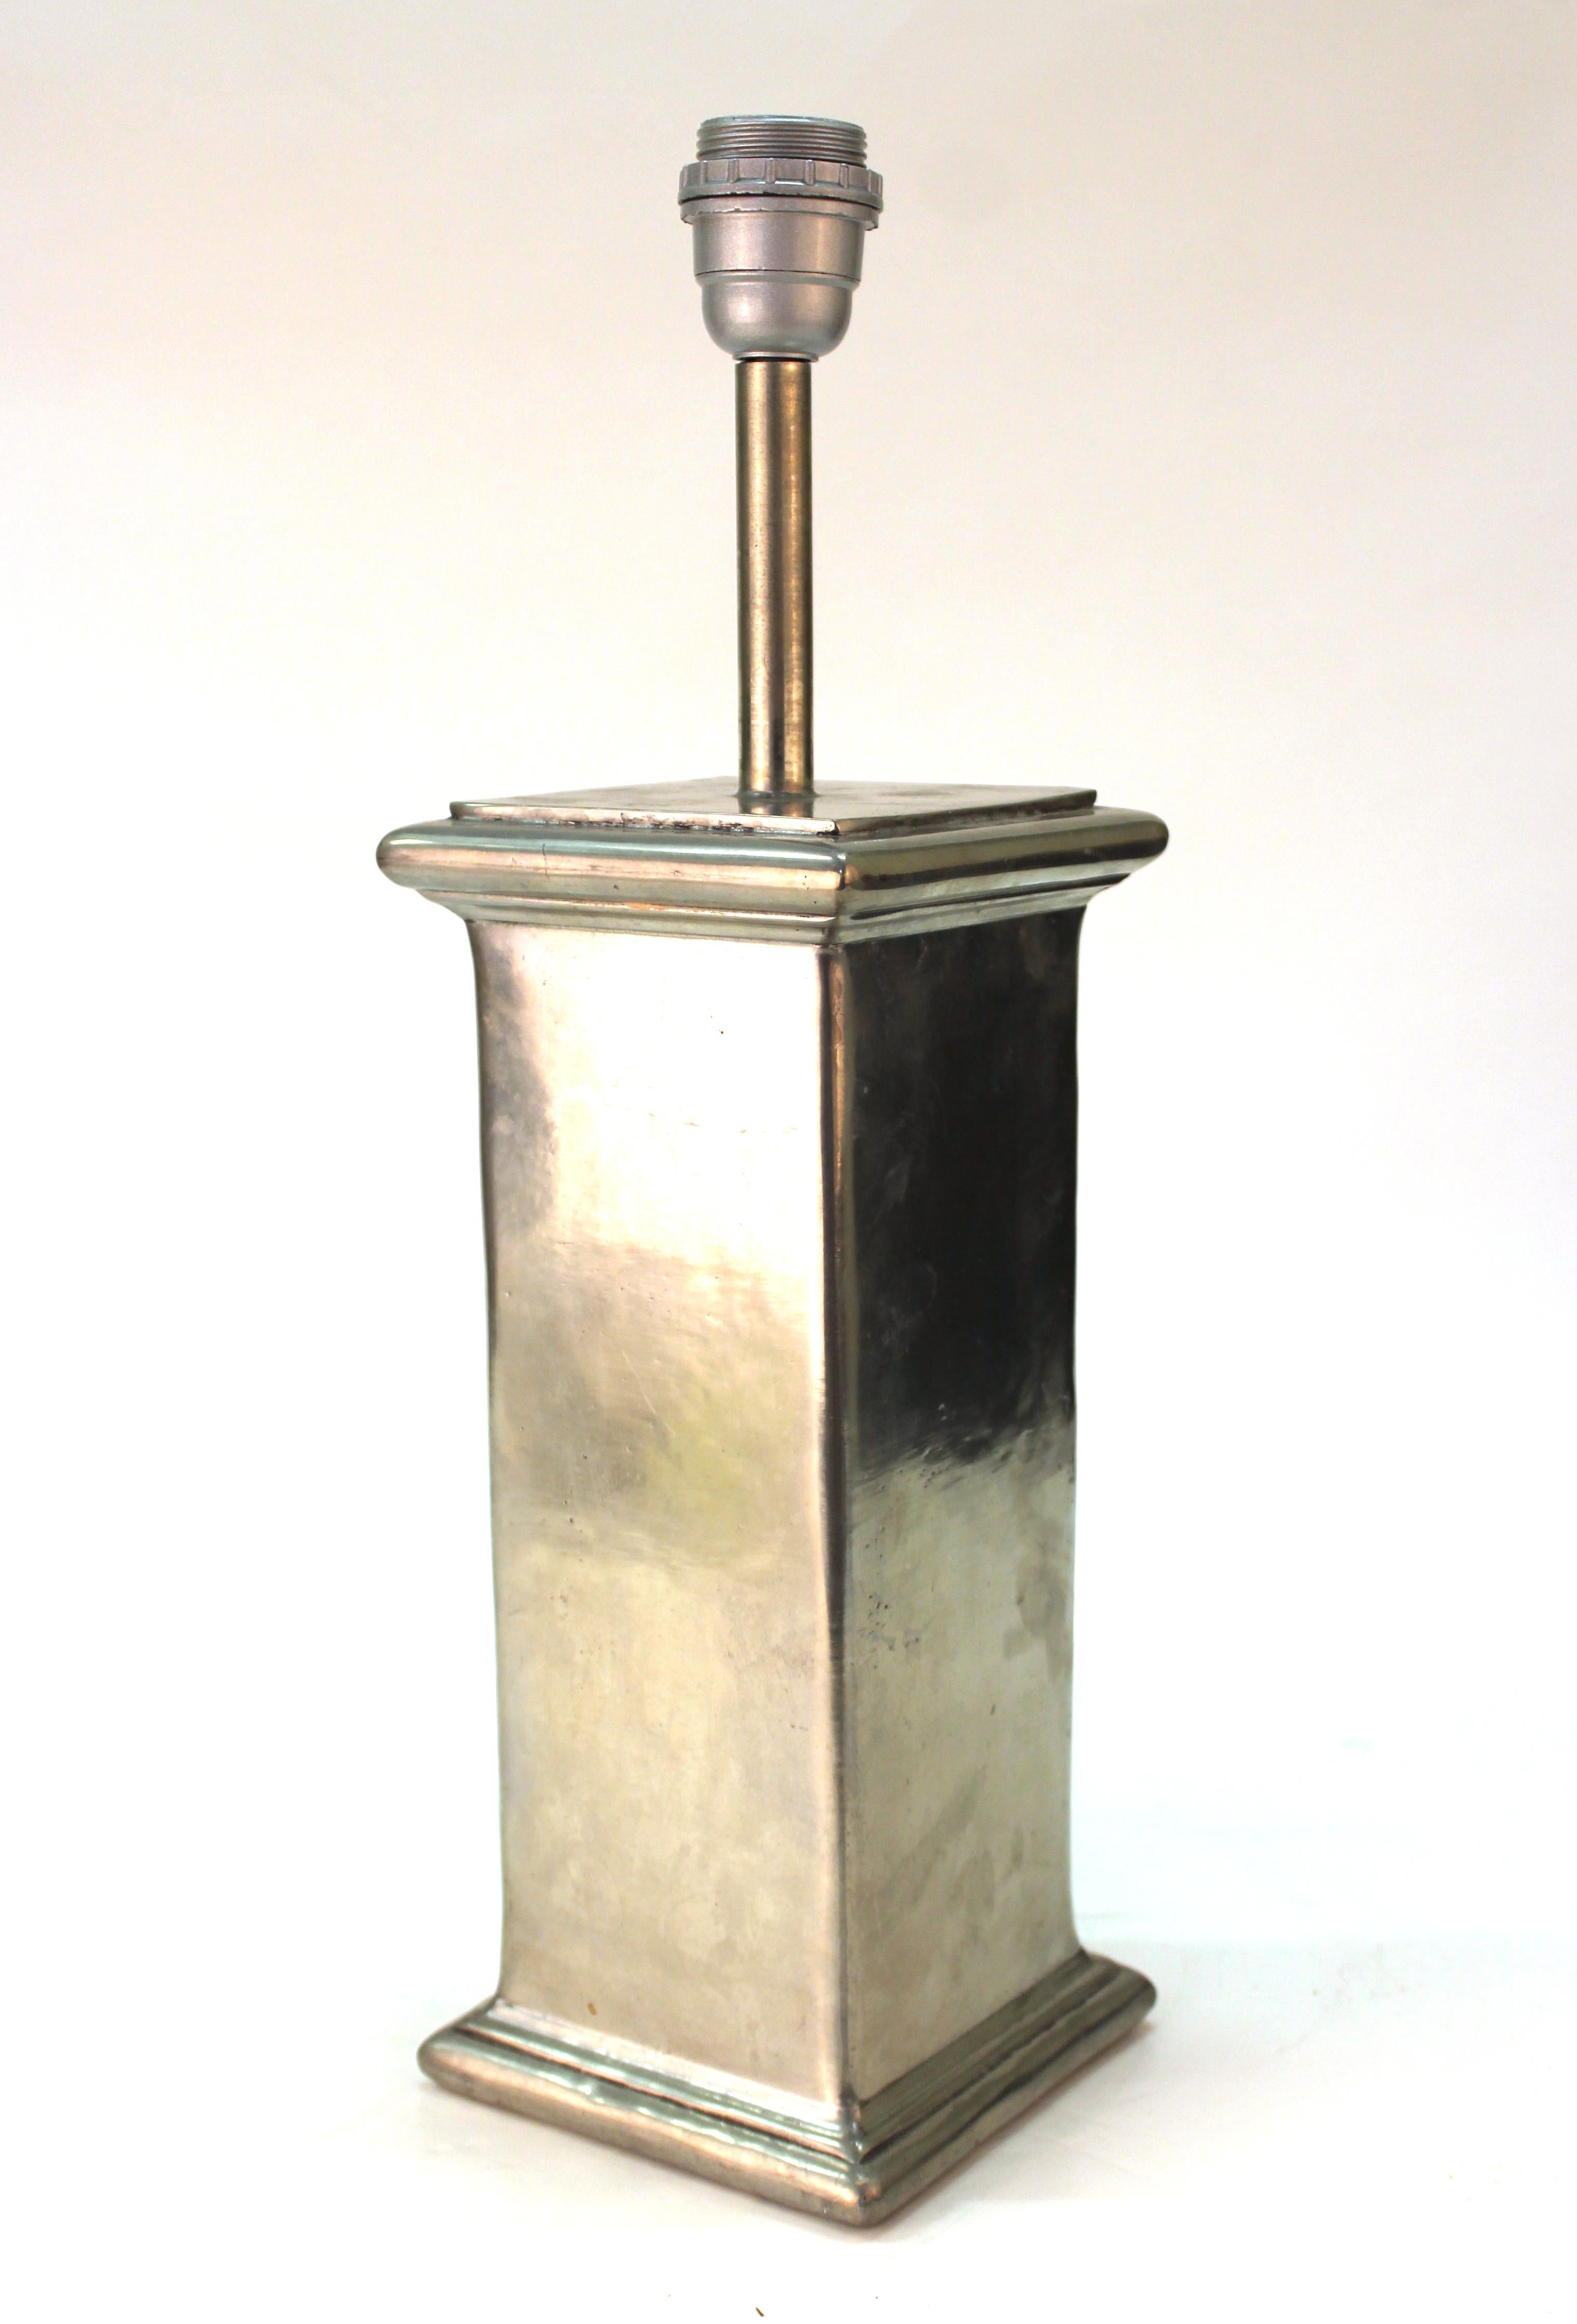 European pair of table lamps, handmade in tin in the 20th century. The pair has square bases with stamped marks on the bottom edge indicating they are handmade in 100 percent tin. In great vintage condition with age-appropriate wear.